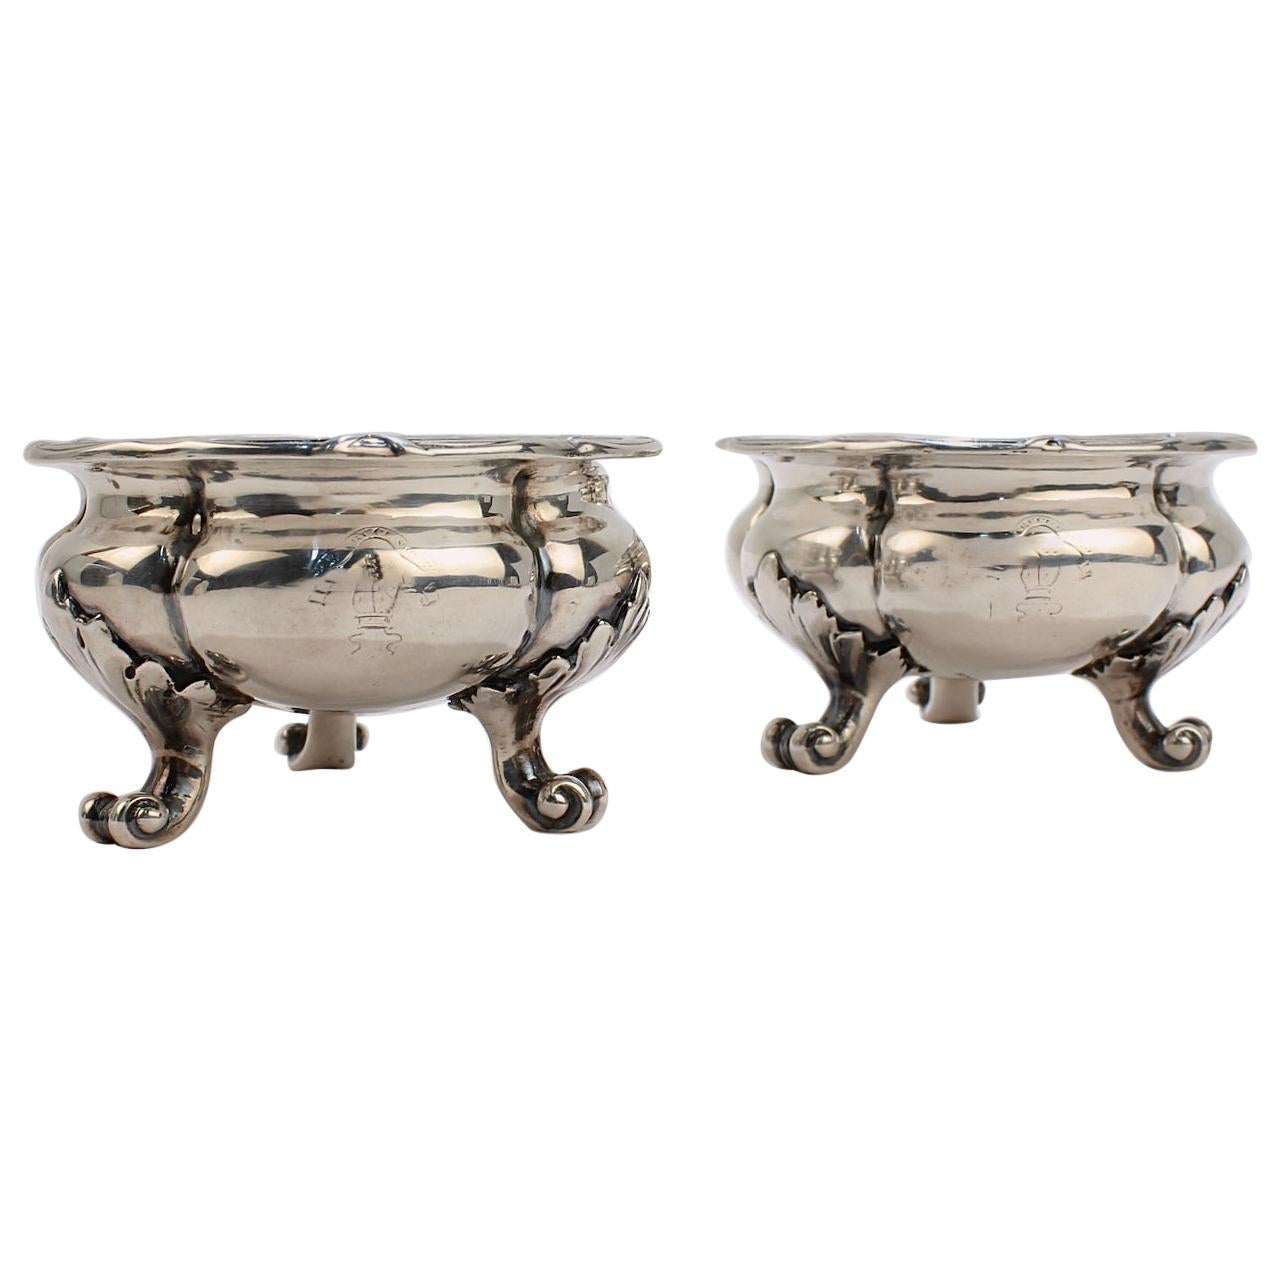 Pair of Crested English Victorian Sterling Silver Salt Cellars by Hunt & Roskell